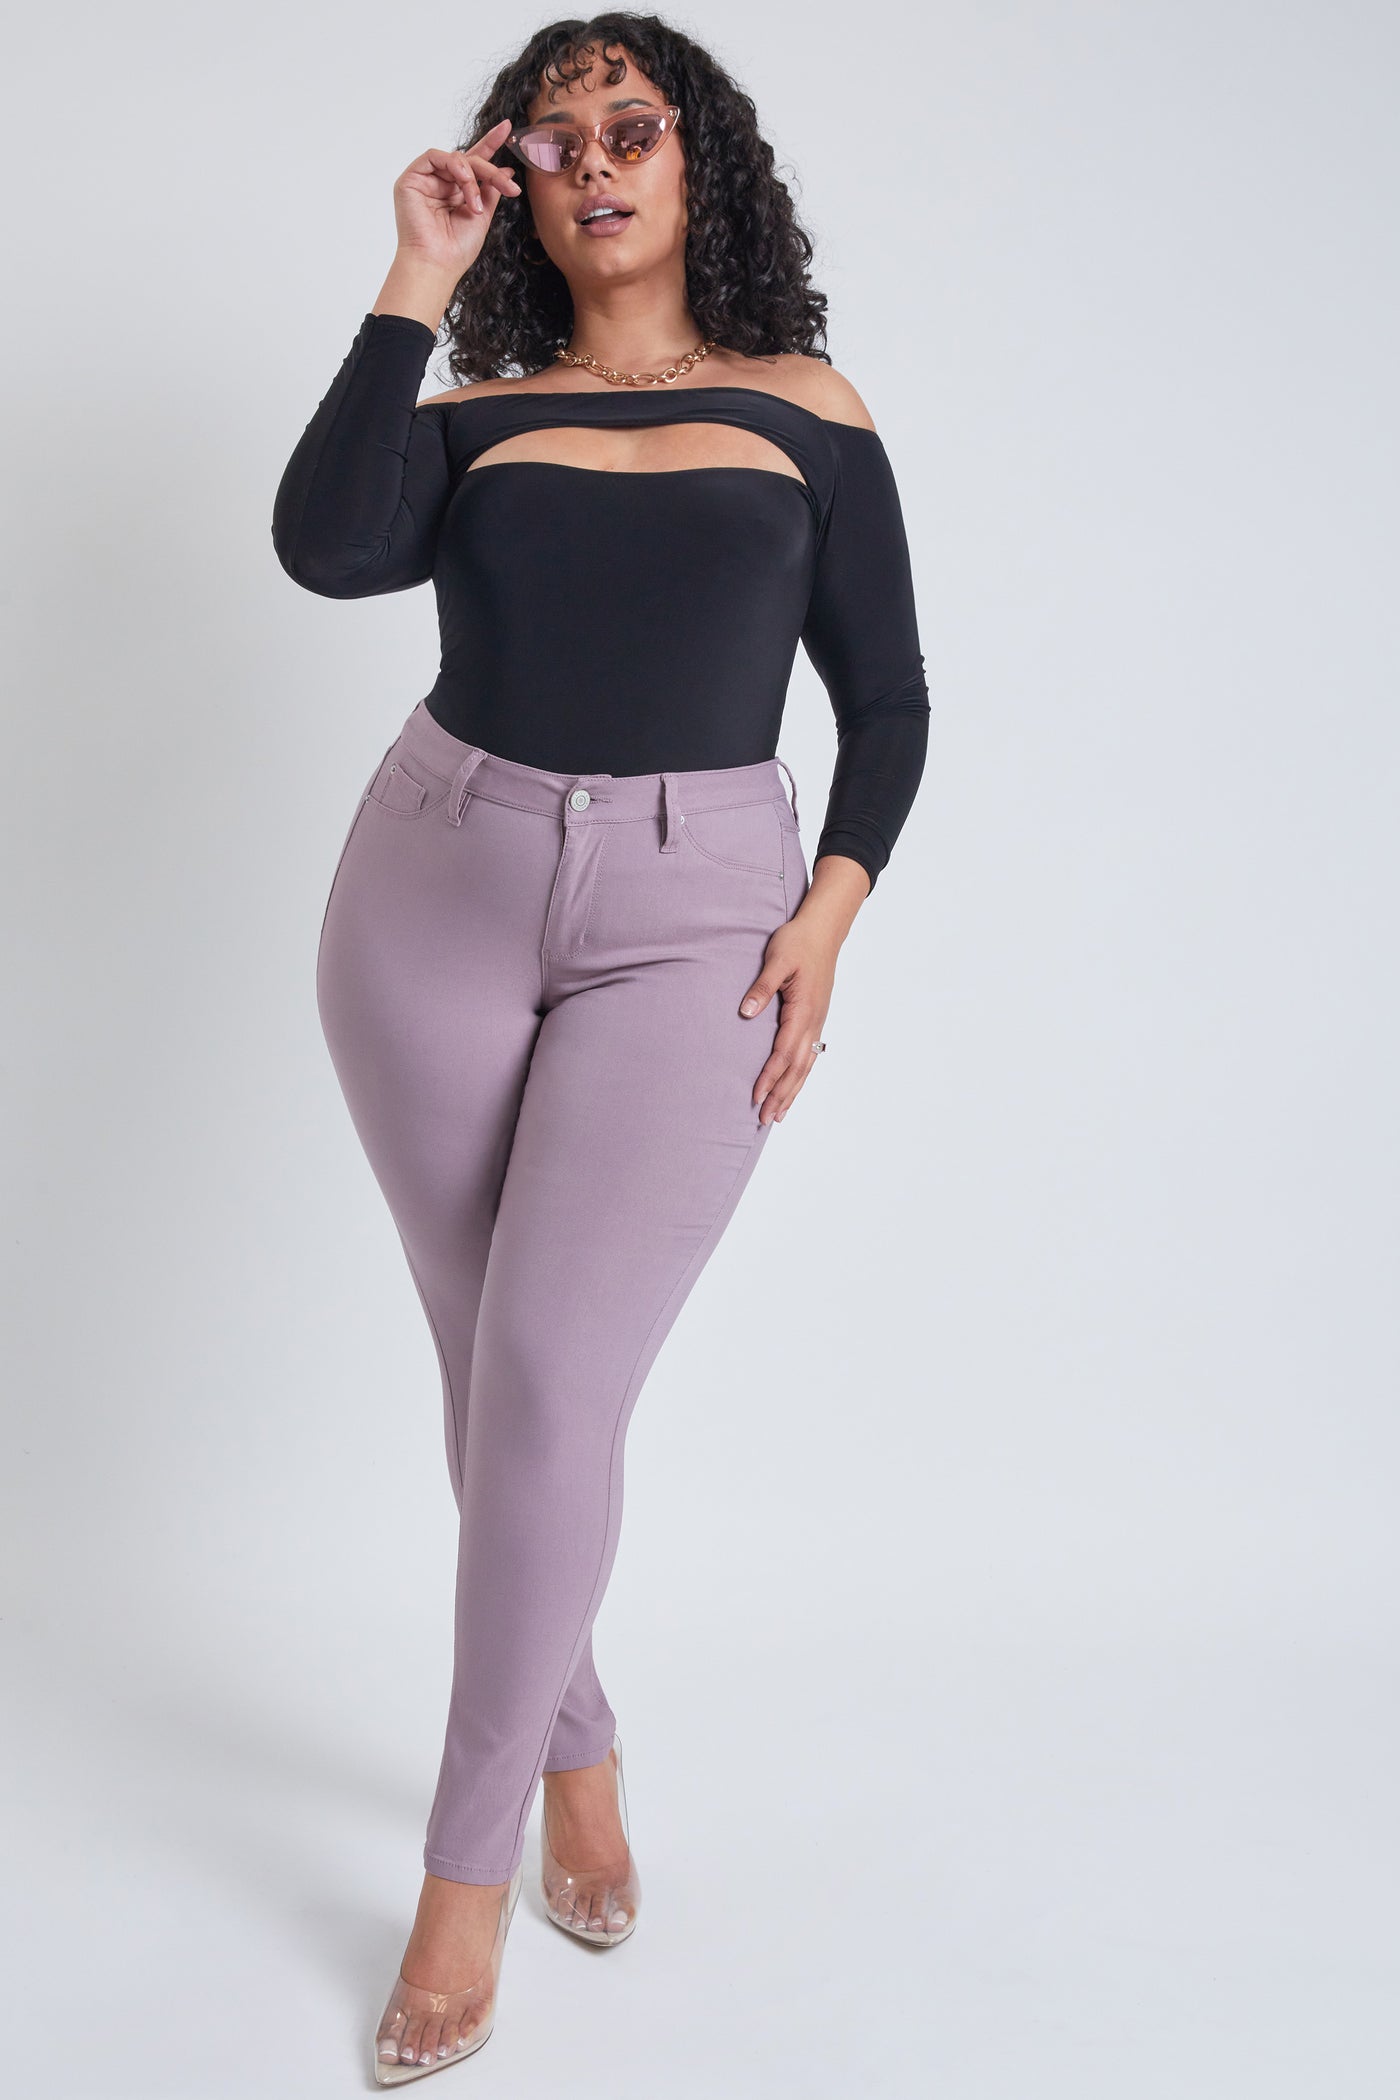 Plus Size Women's Hyperstretch Forever Color Pants - Pastels